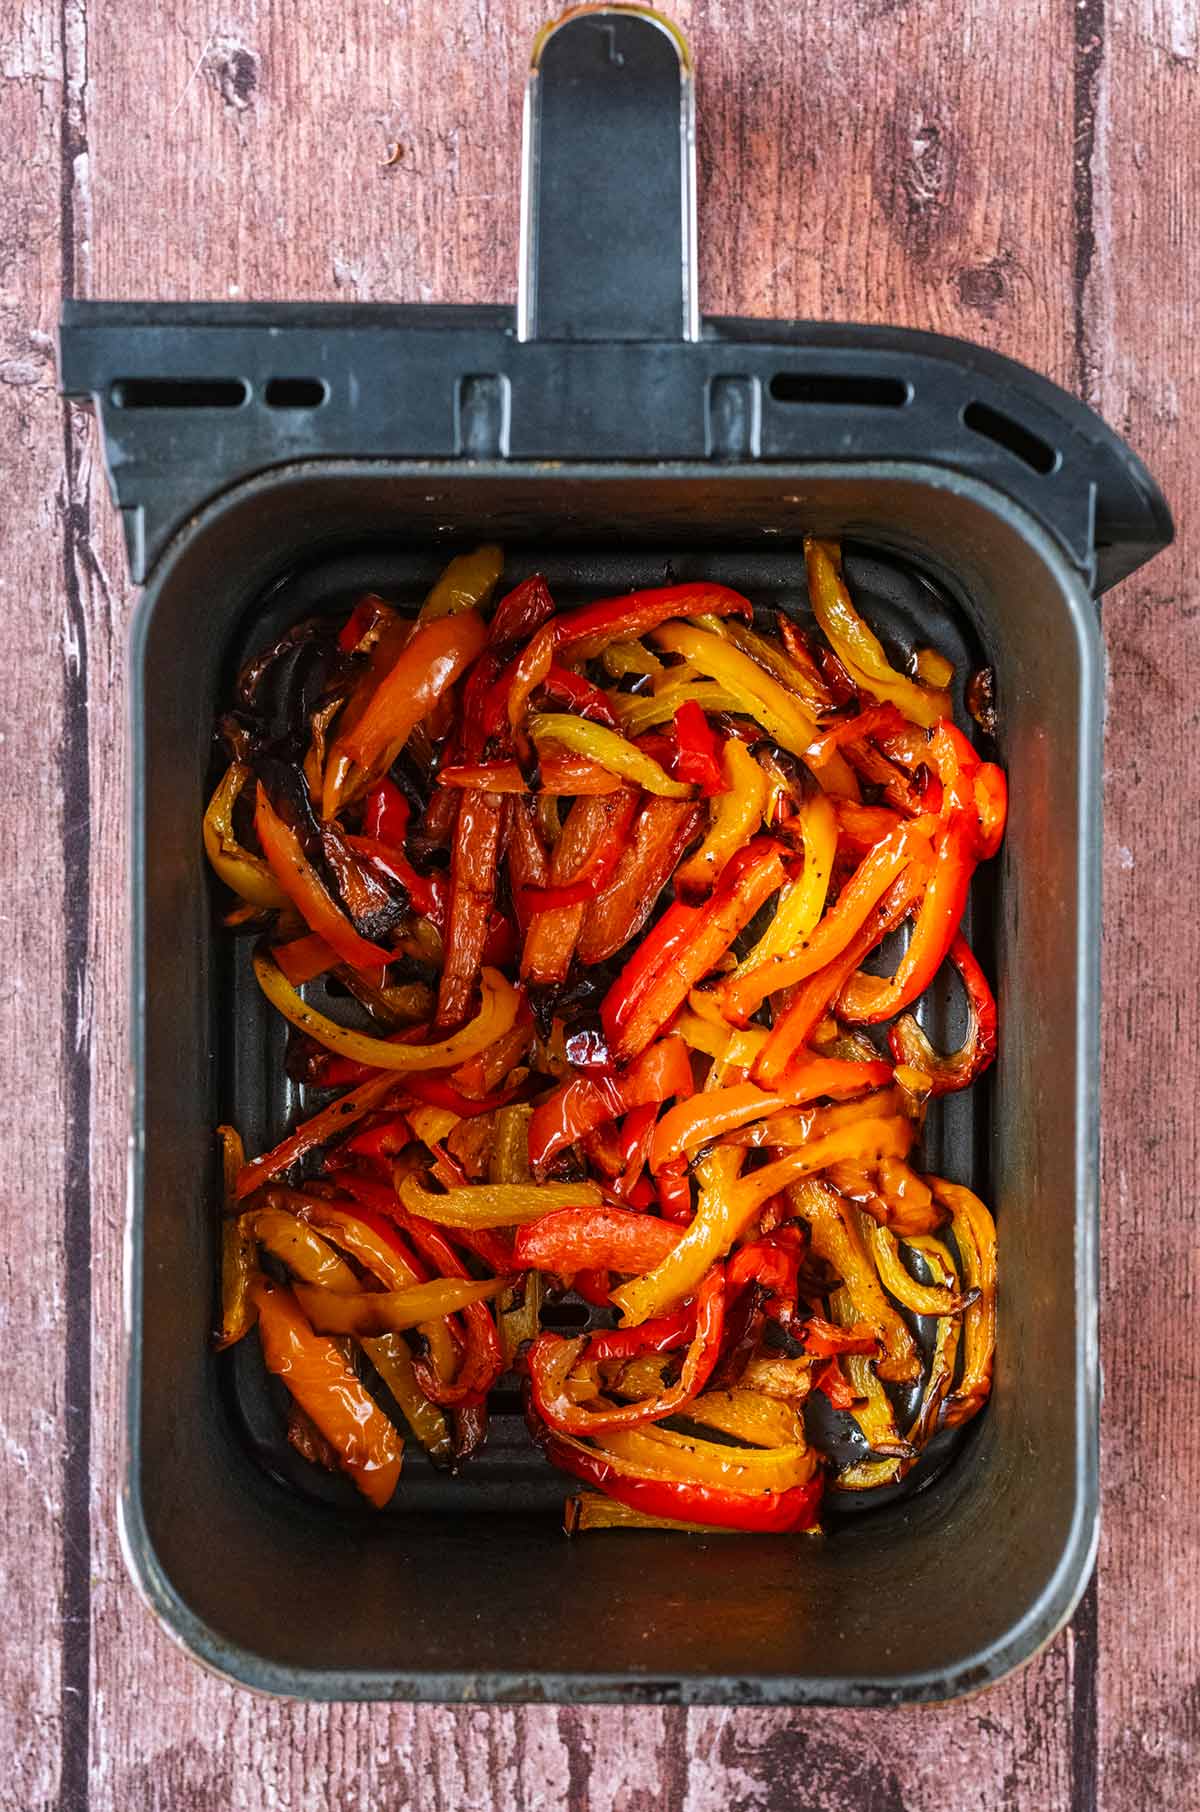 An air fryer basket full of cooked red, orange and yellow pepper slices